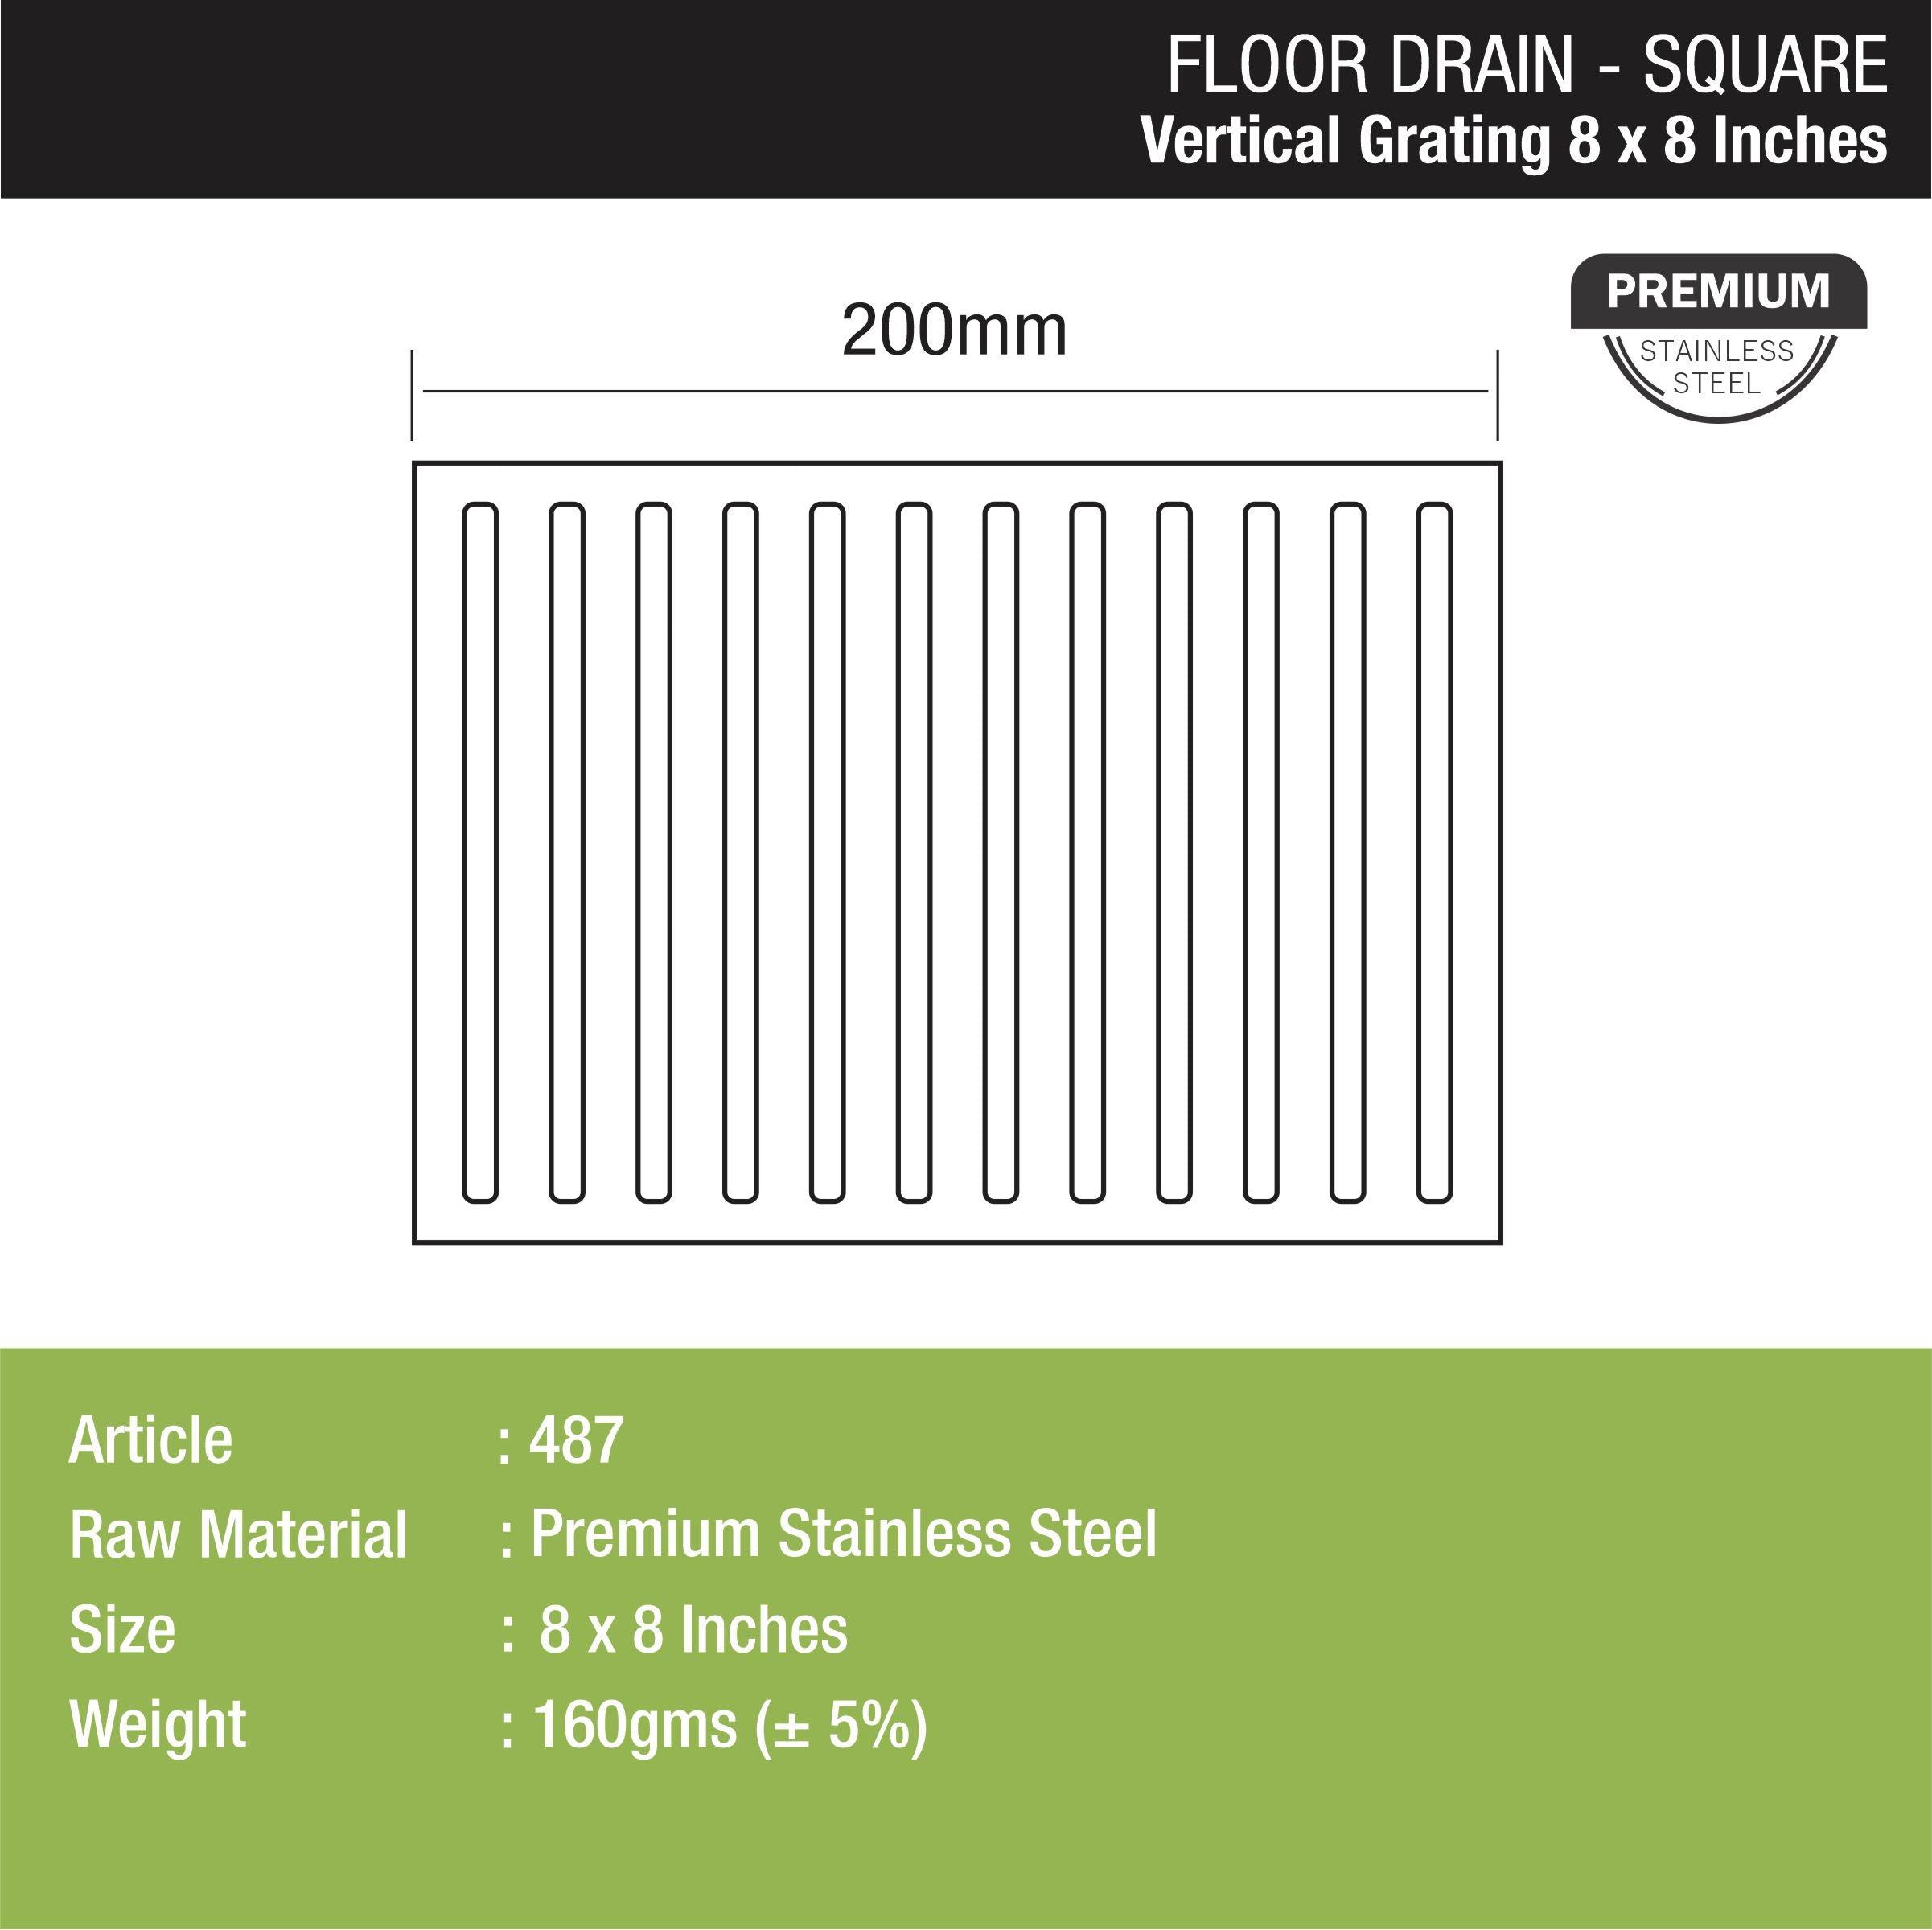 Vertical Grating Top (8 x 8 inches) dimensions and sizes